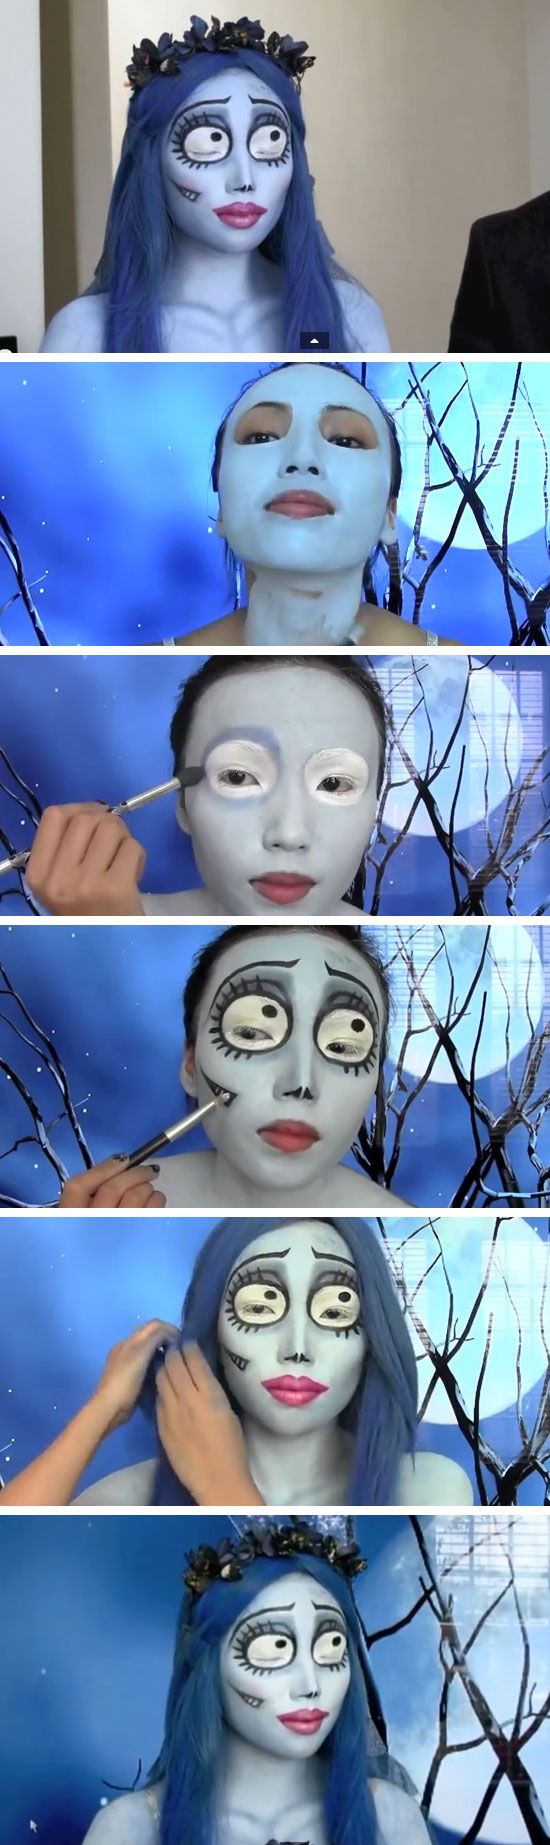 25 Super Cool Step By Step Makeup Tutorials For Halloween Hative